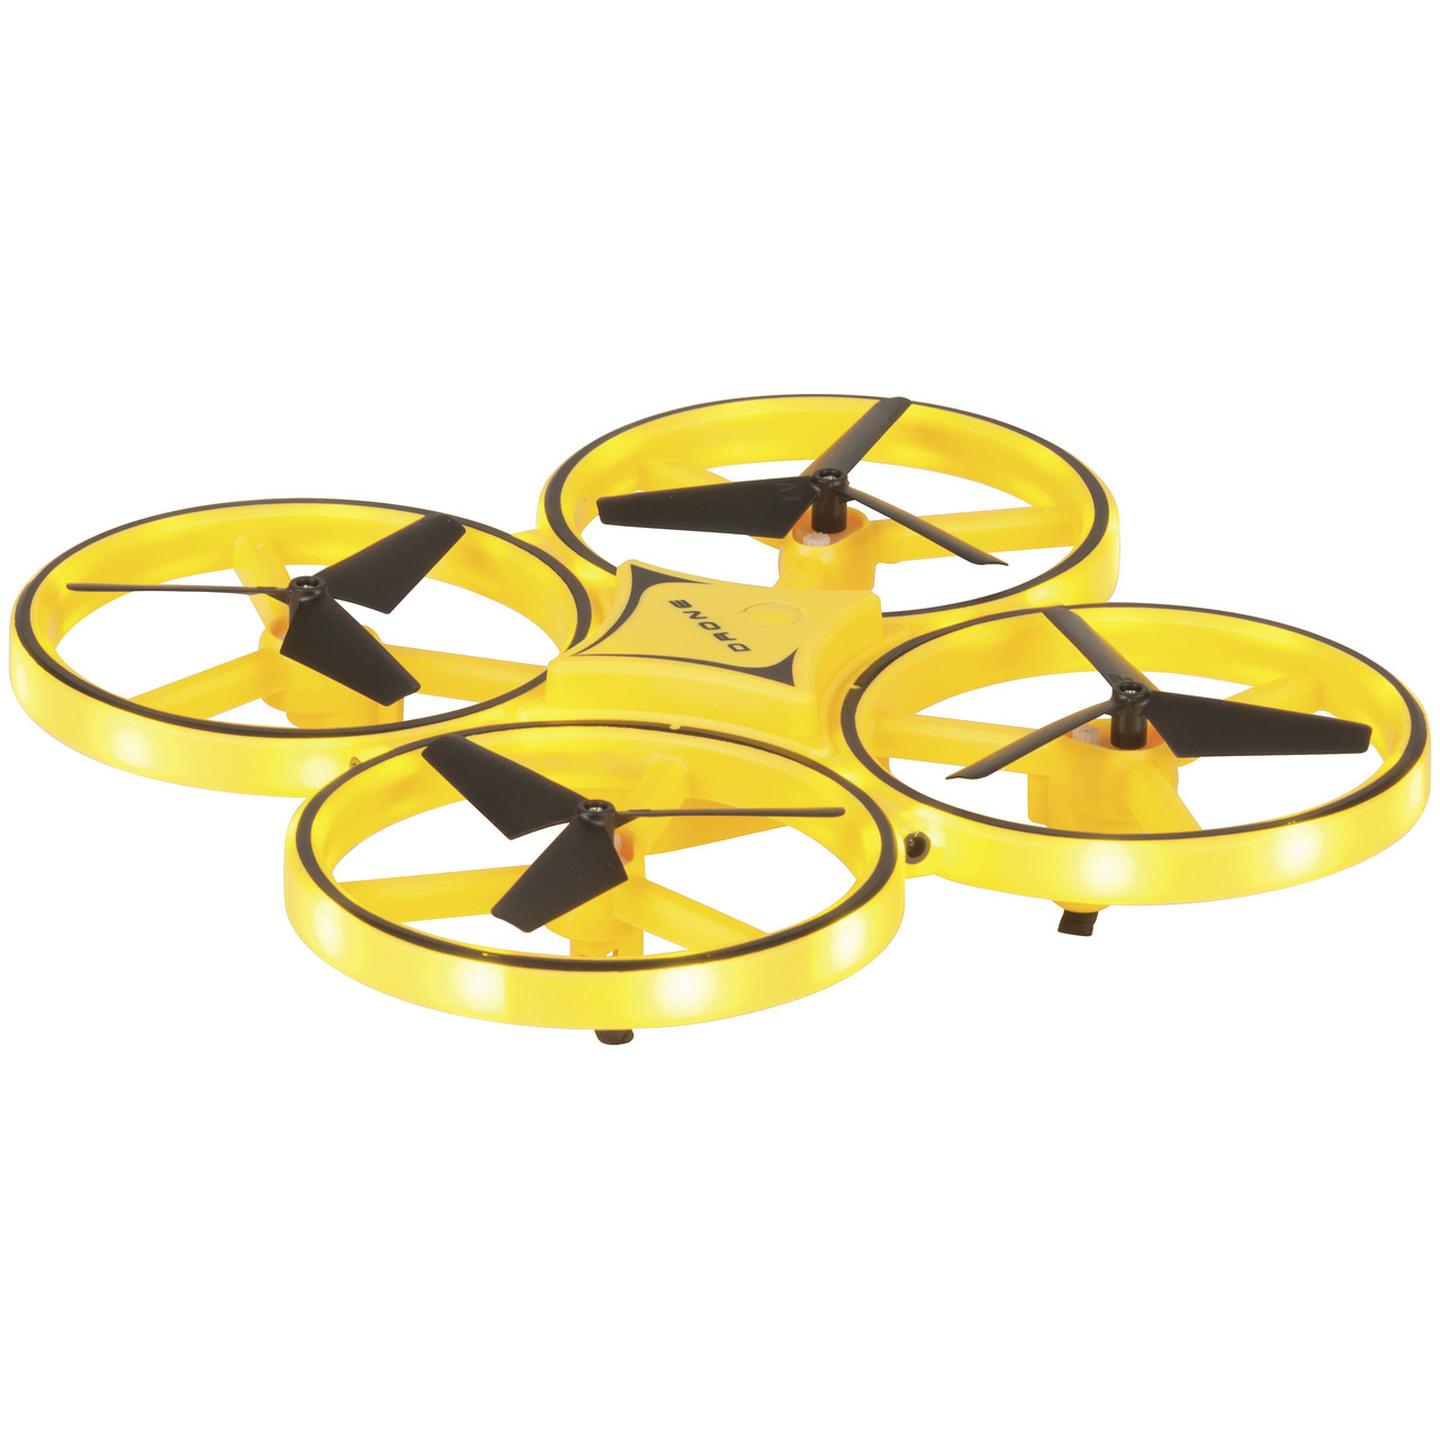 Motion Drone with Gravity Sensor